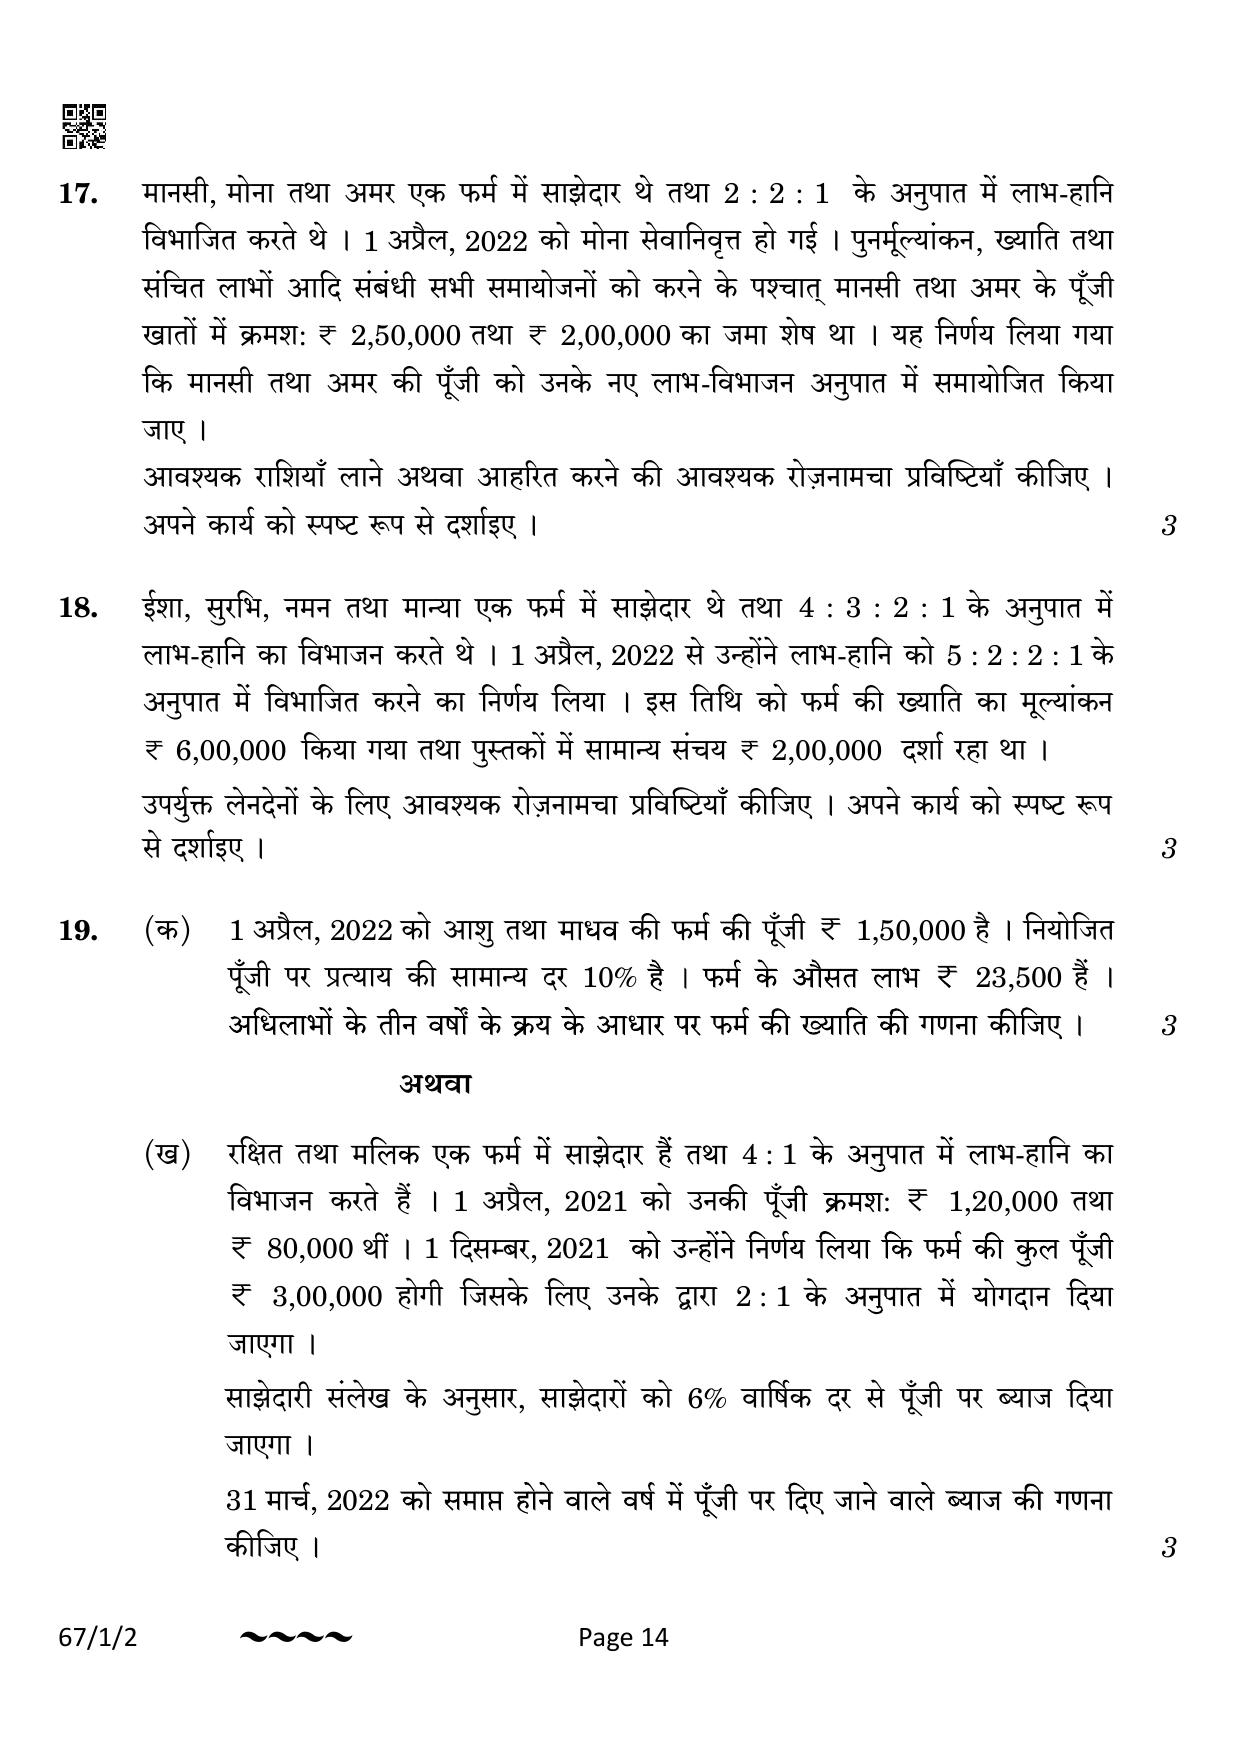 CBSE Class 12 67-1-2 Accountancy 2023 Question Paper - Page 14